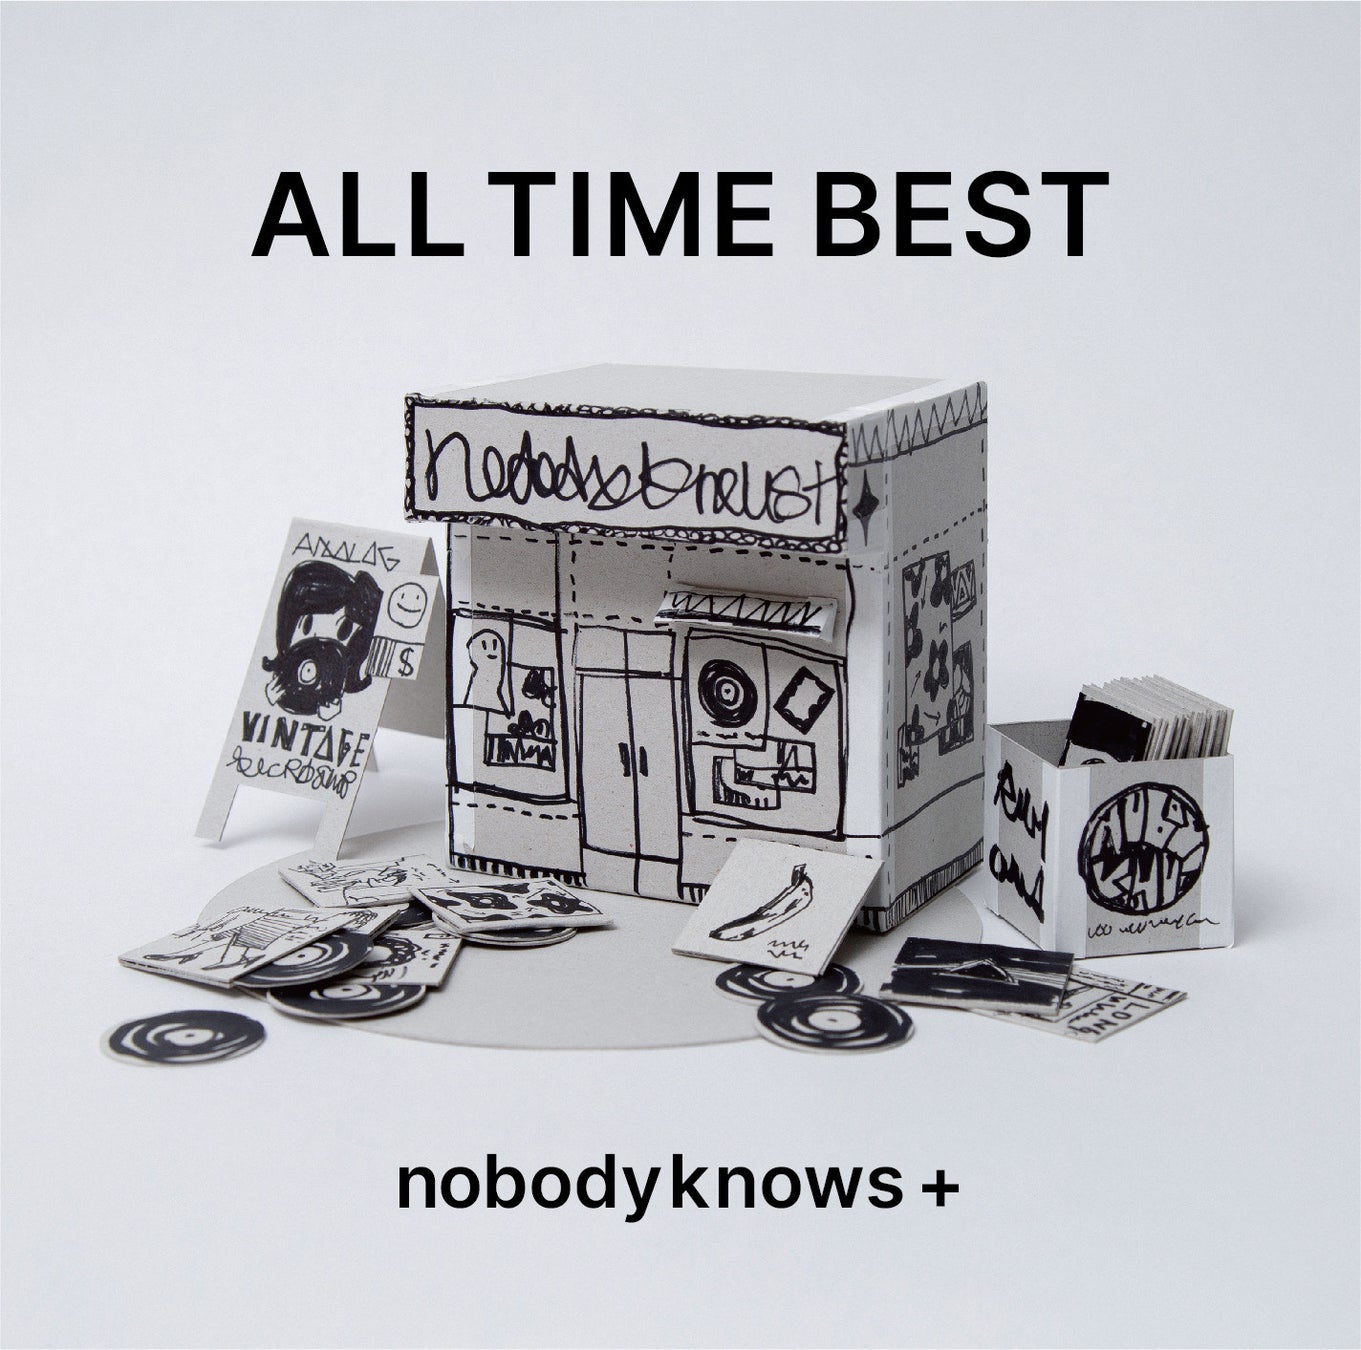 nobodyknows＋『ALL TIME BEST』リリース決定！！のサブ画像1